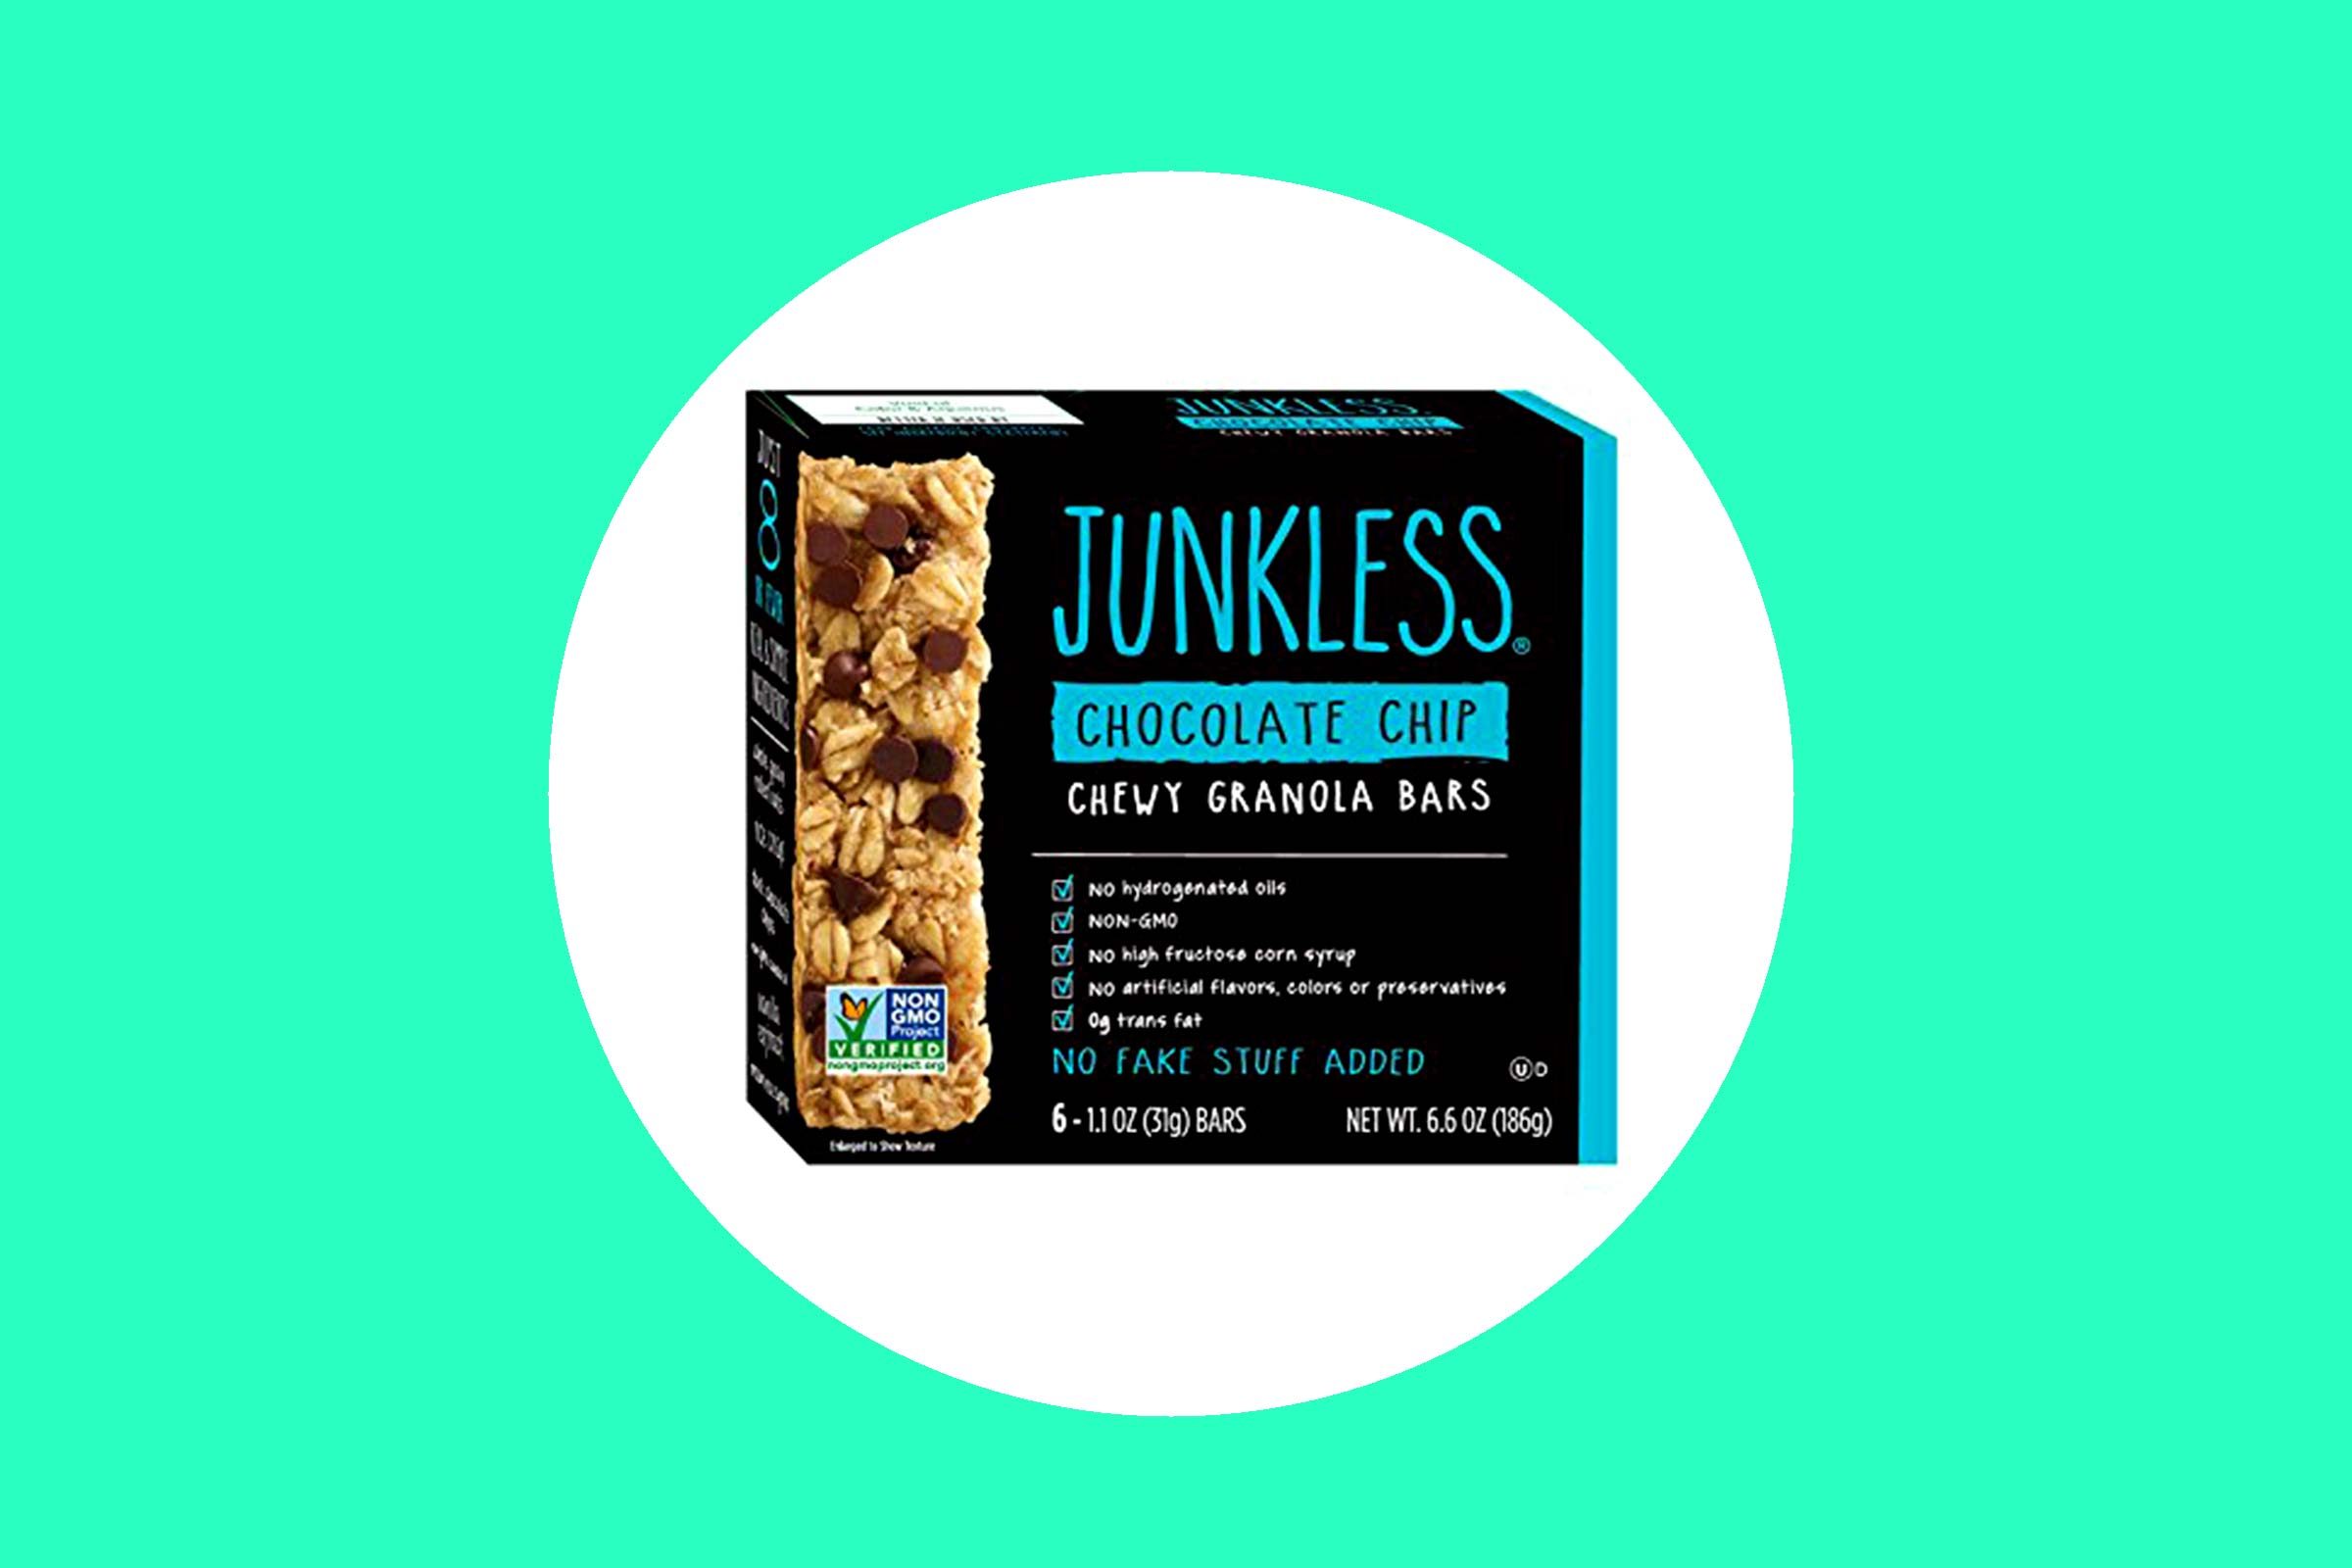 19-junkless-Healthiest-Supermarket-Foods-You-Can-Buy-simplyeight.com